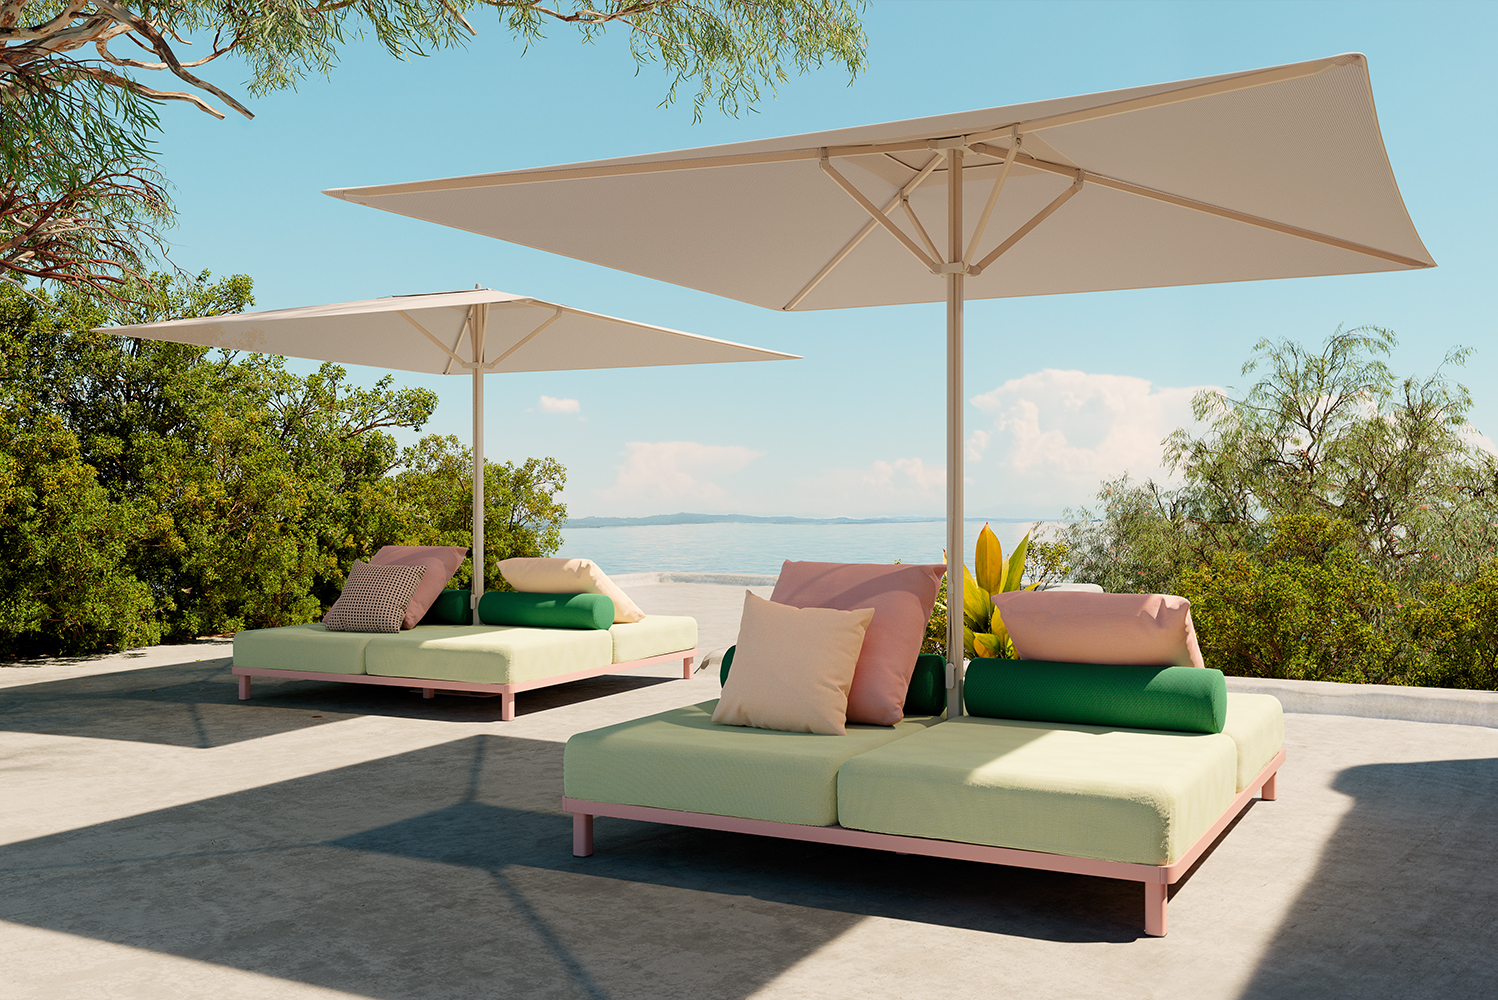 Konstantin Grcic relaunched the Meteo parasols 